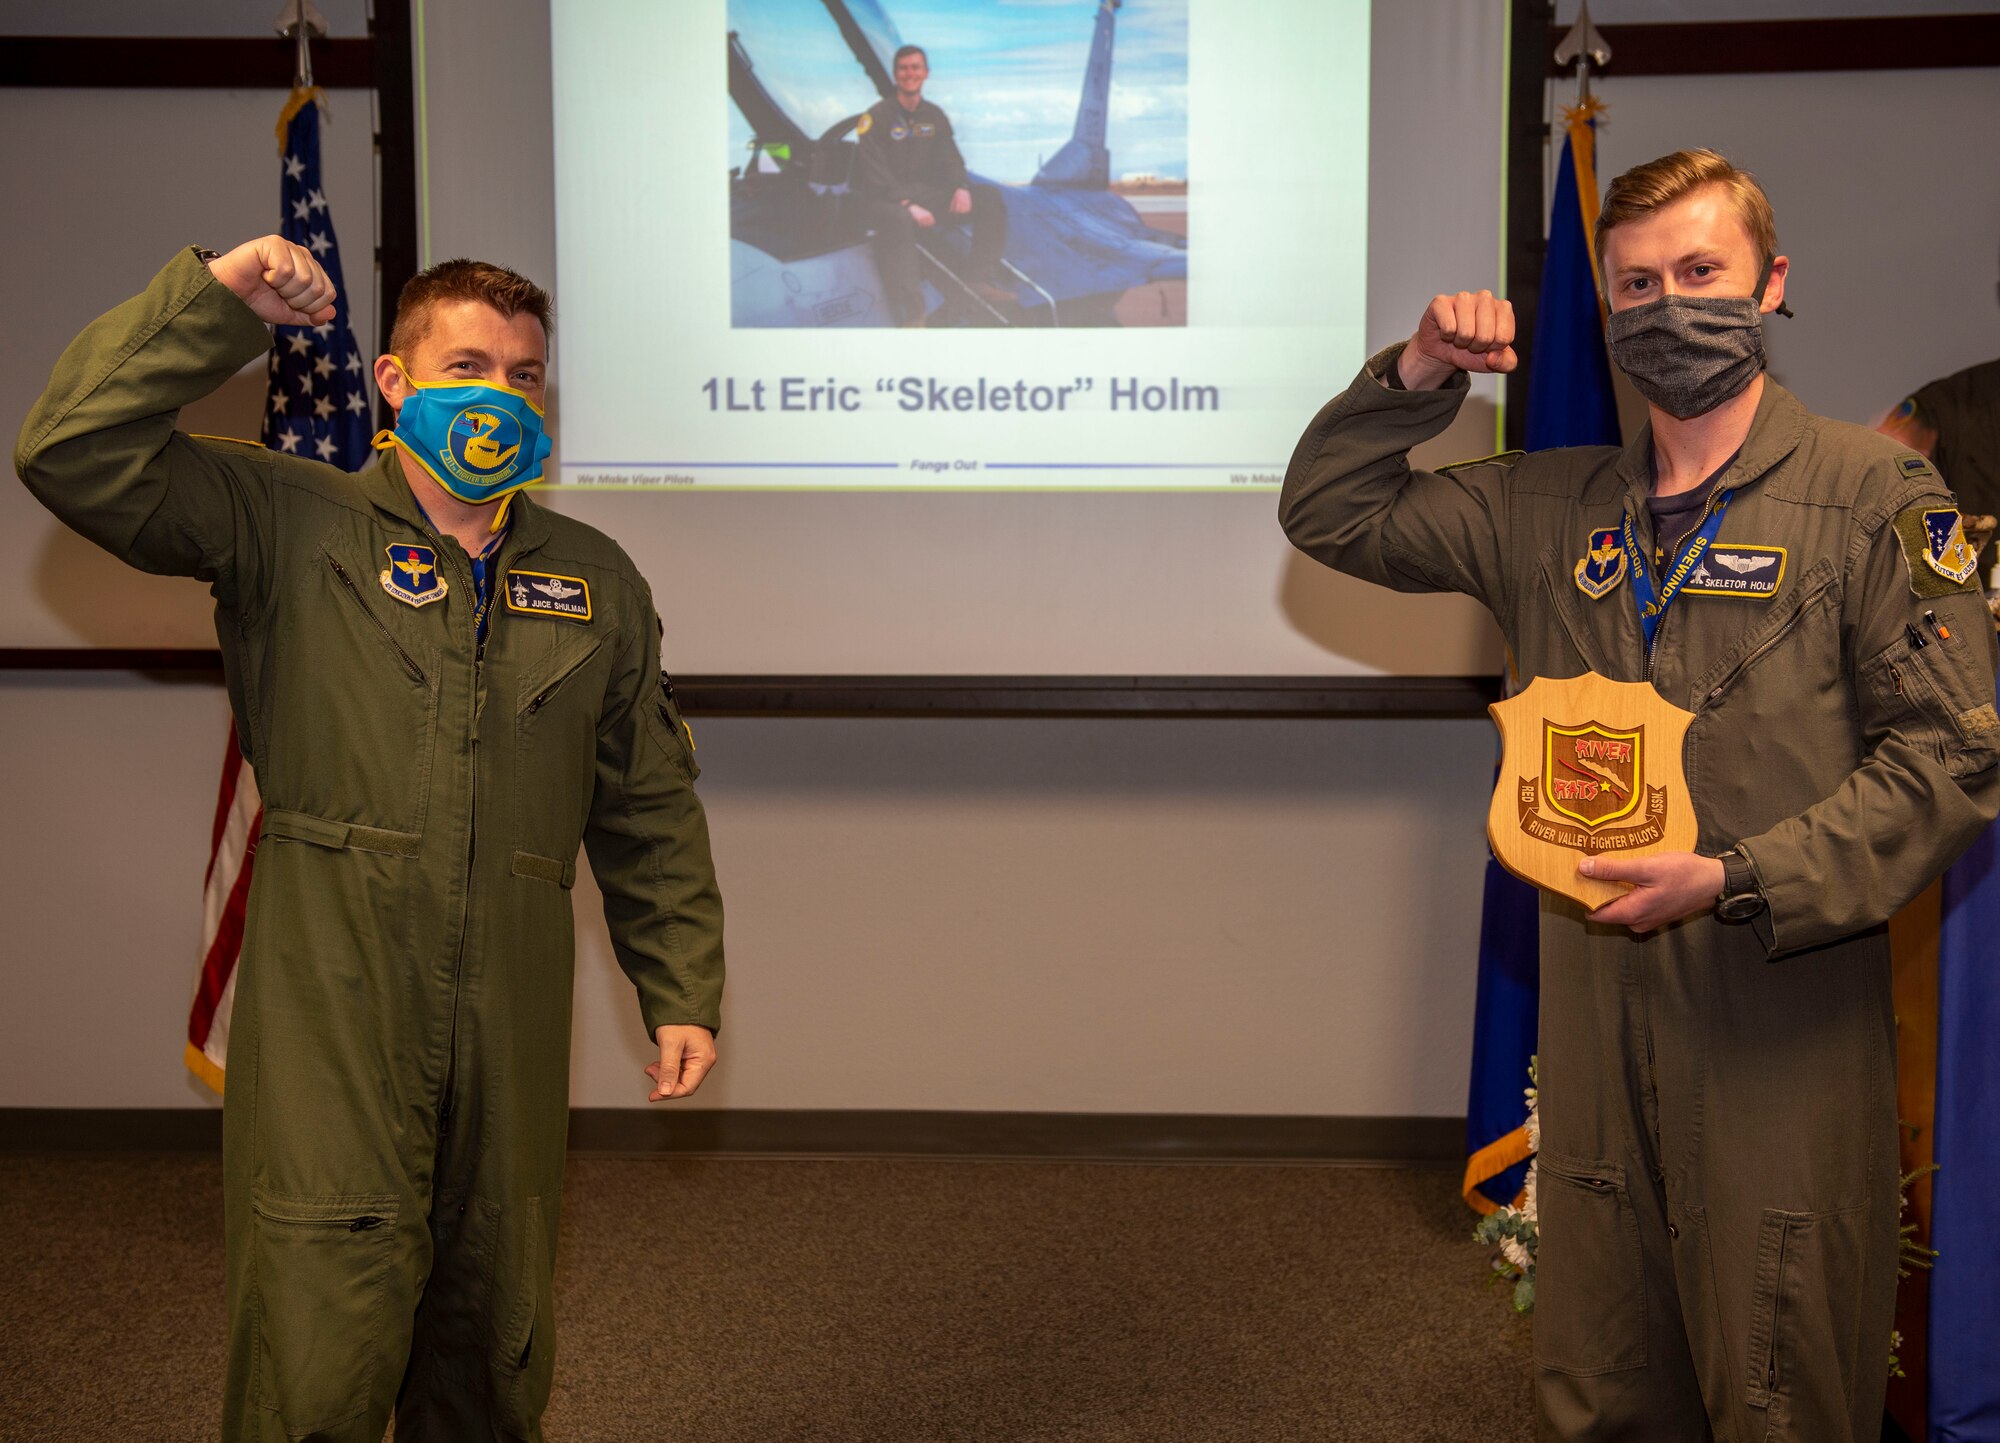 Lt. Col. Jeffrey Shulman, 311th Fighter Squadron commander, presents the River Rat award to 1st Lt. Eric Holm, 311th FS Basic Course graduate, during the graduation of B-course Class 19-DBH, May 8, 2020, on Holloman Air Force Base, N.M. Twelve B-course students graduated and will be reassigned to operational flying units throughout the Combat Air Force. (U.S. Air Force photo by Staff Sgt. Christine Groening)